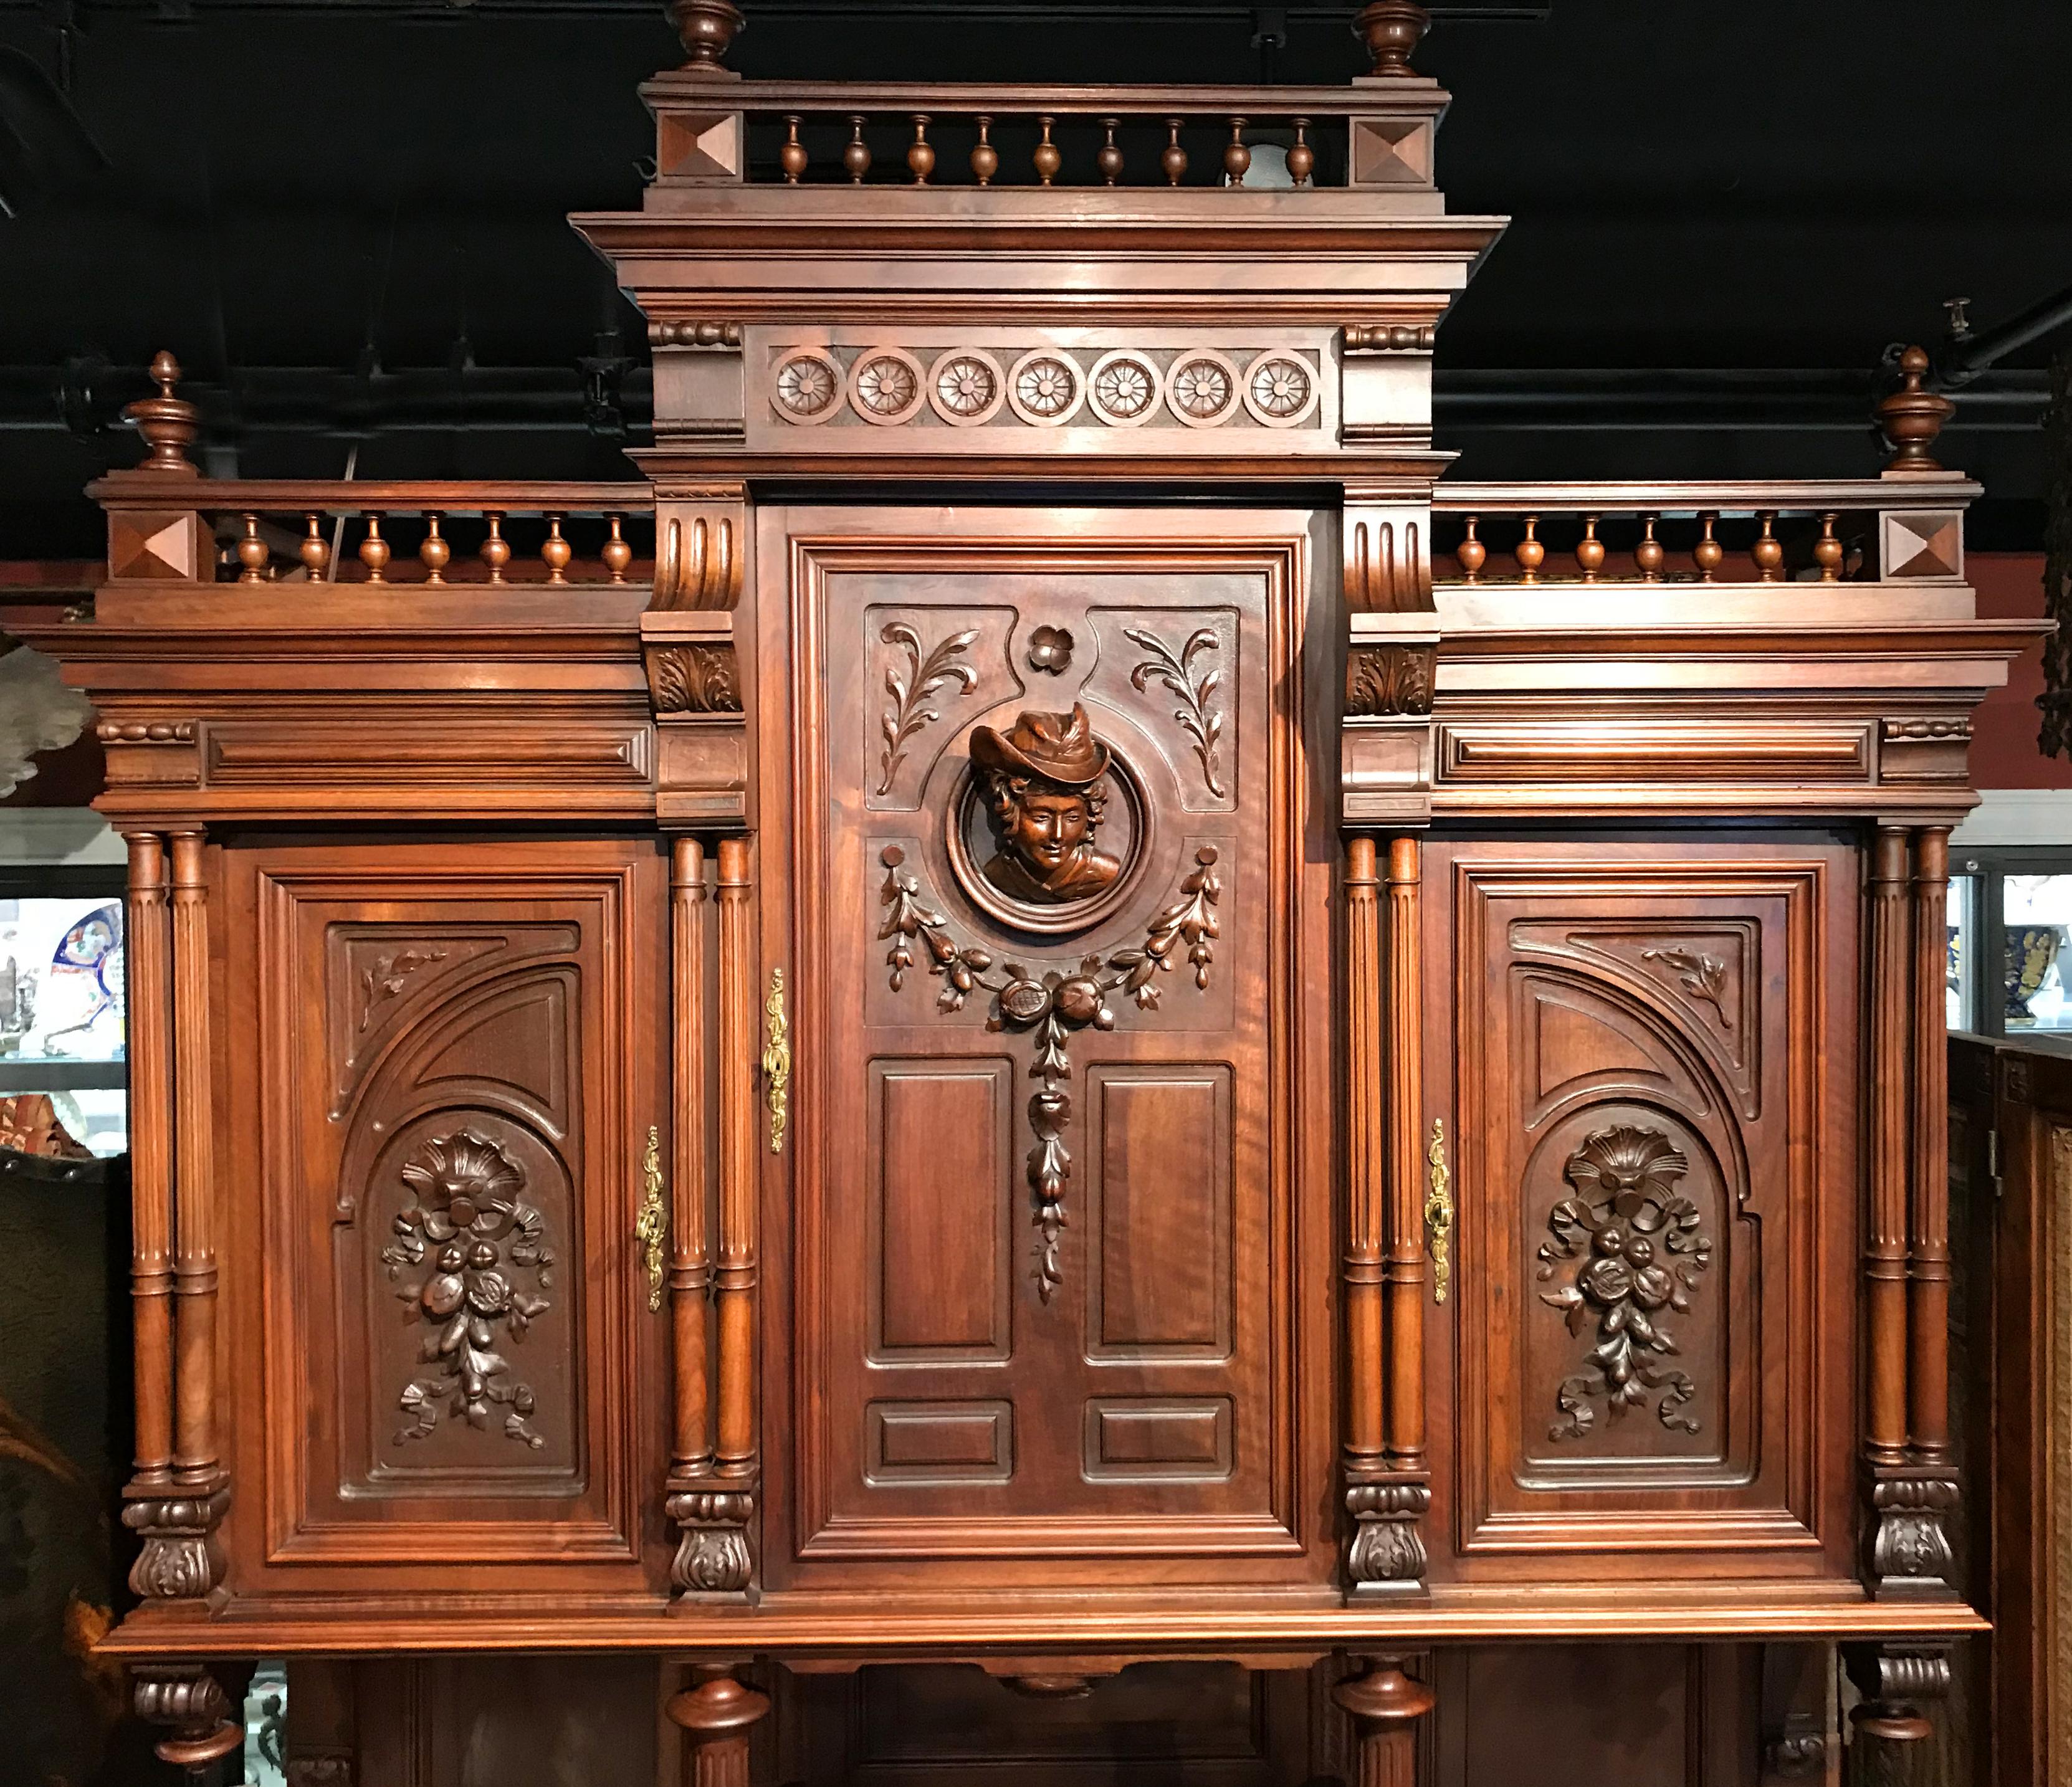 An exceptional two part court or castle cupboard or server in walnut, the upper case with upper spindle gallery featuring corner turned finials surmounting three large doors, each ornamented in high relief with a female figure on the center door,